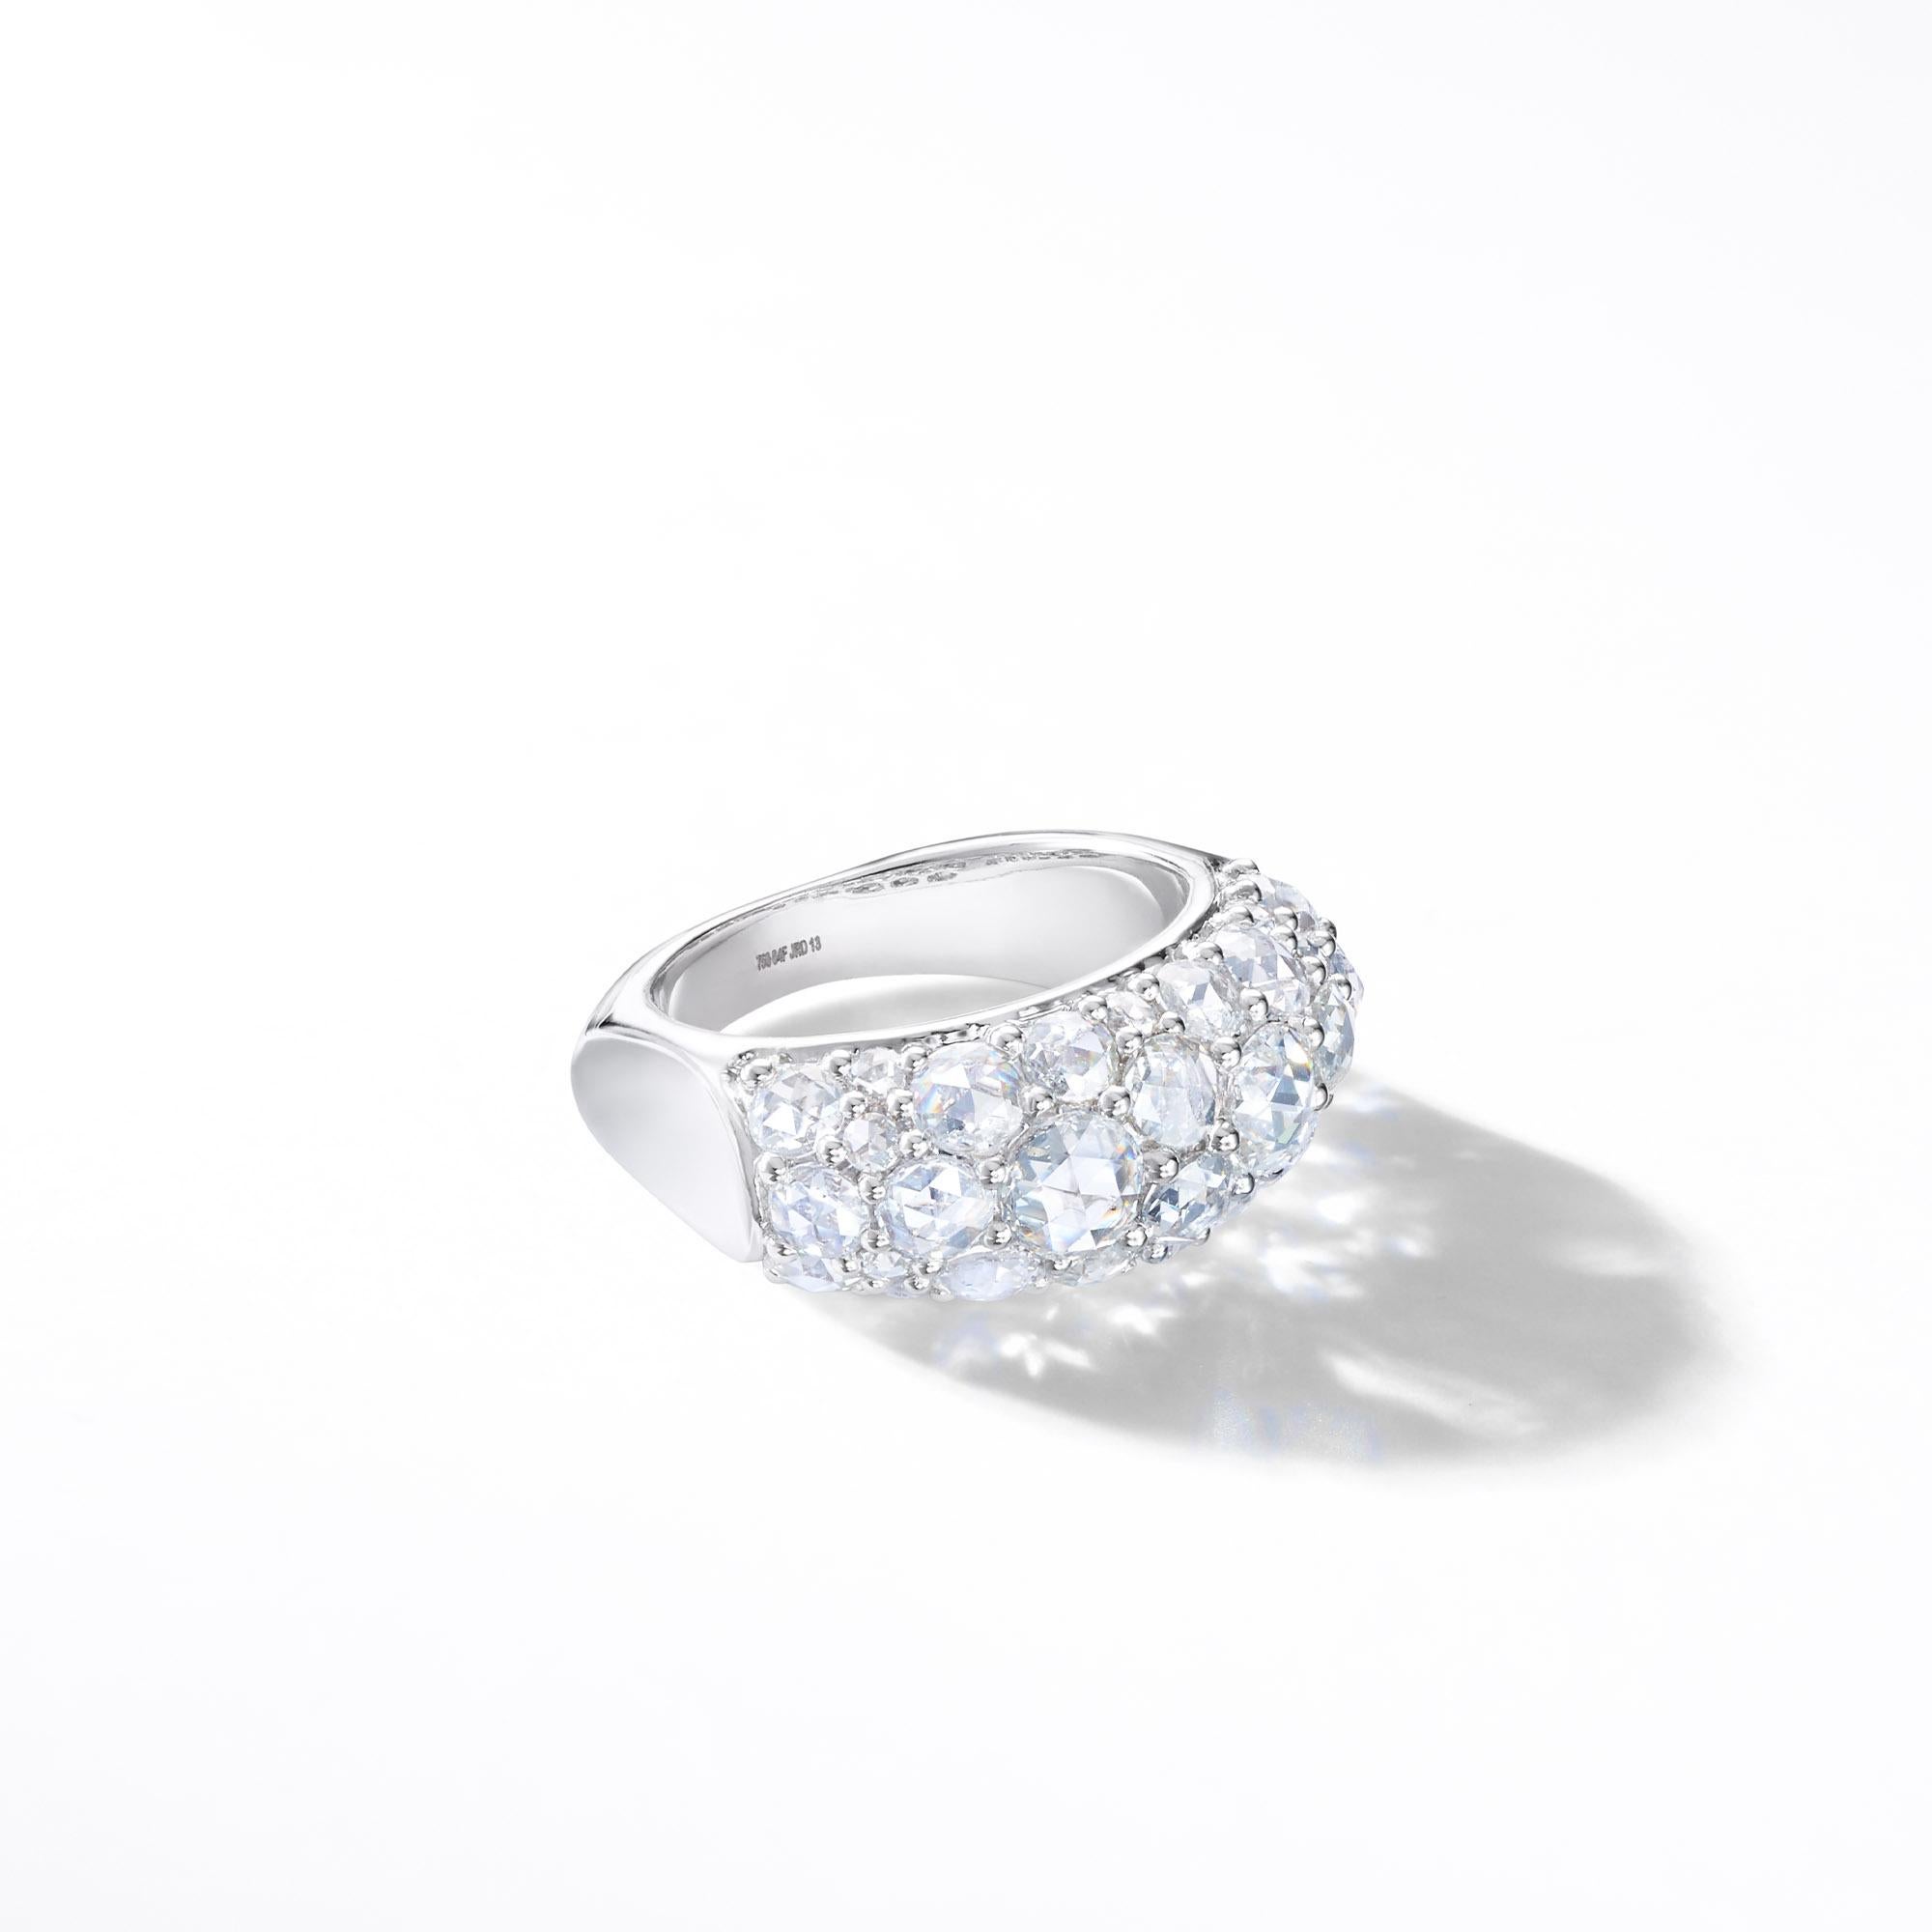 The sublime design of this 2.3 carat diamond ring, created by our expert craftsmen, is a prime example of subtle luxury. The very nature of this fine jewelry piece, with curved sides, makes it comfortable to wear, designed to complement and suit the